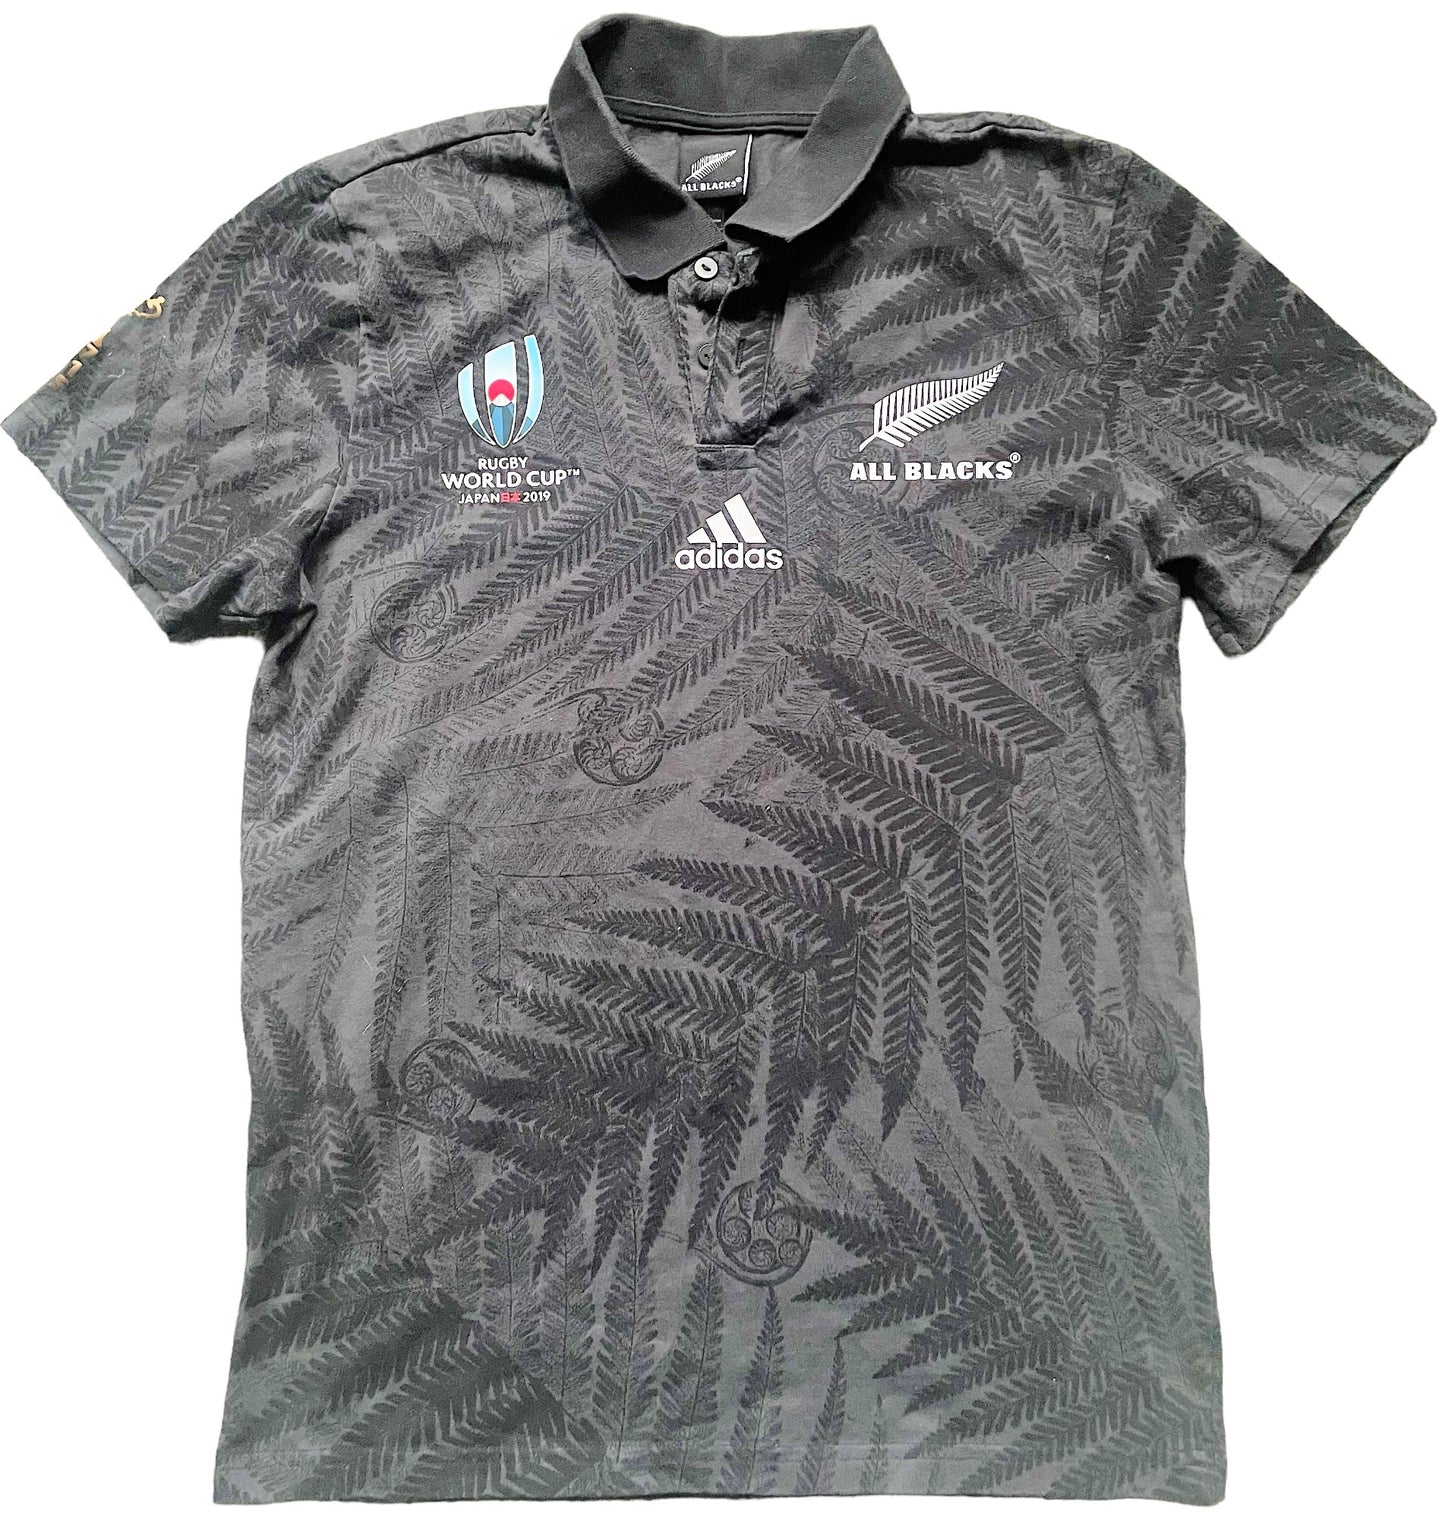 2019 All Blacks Rugby Jersey (very good) Adults Small